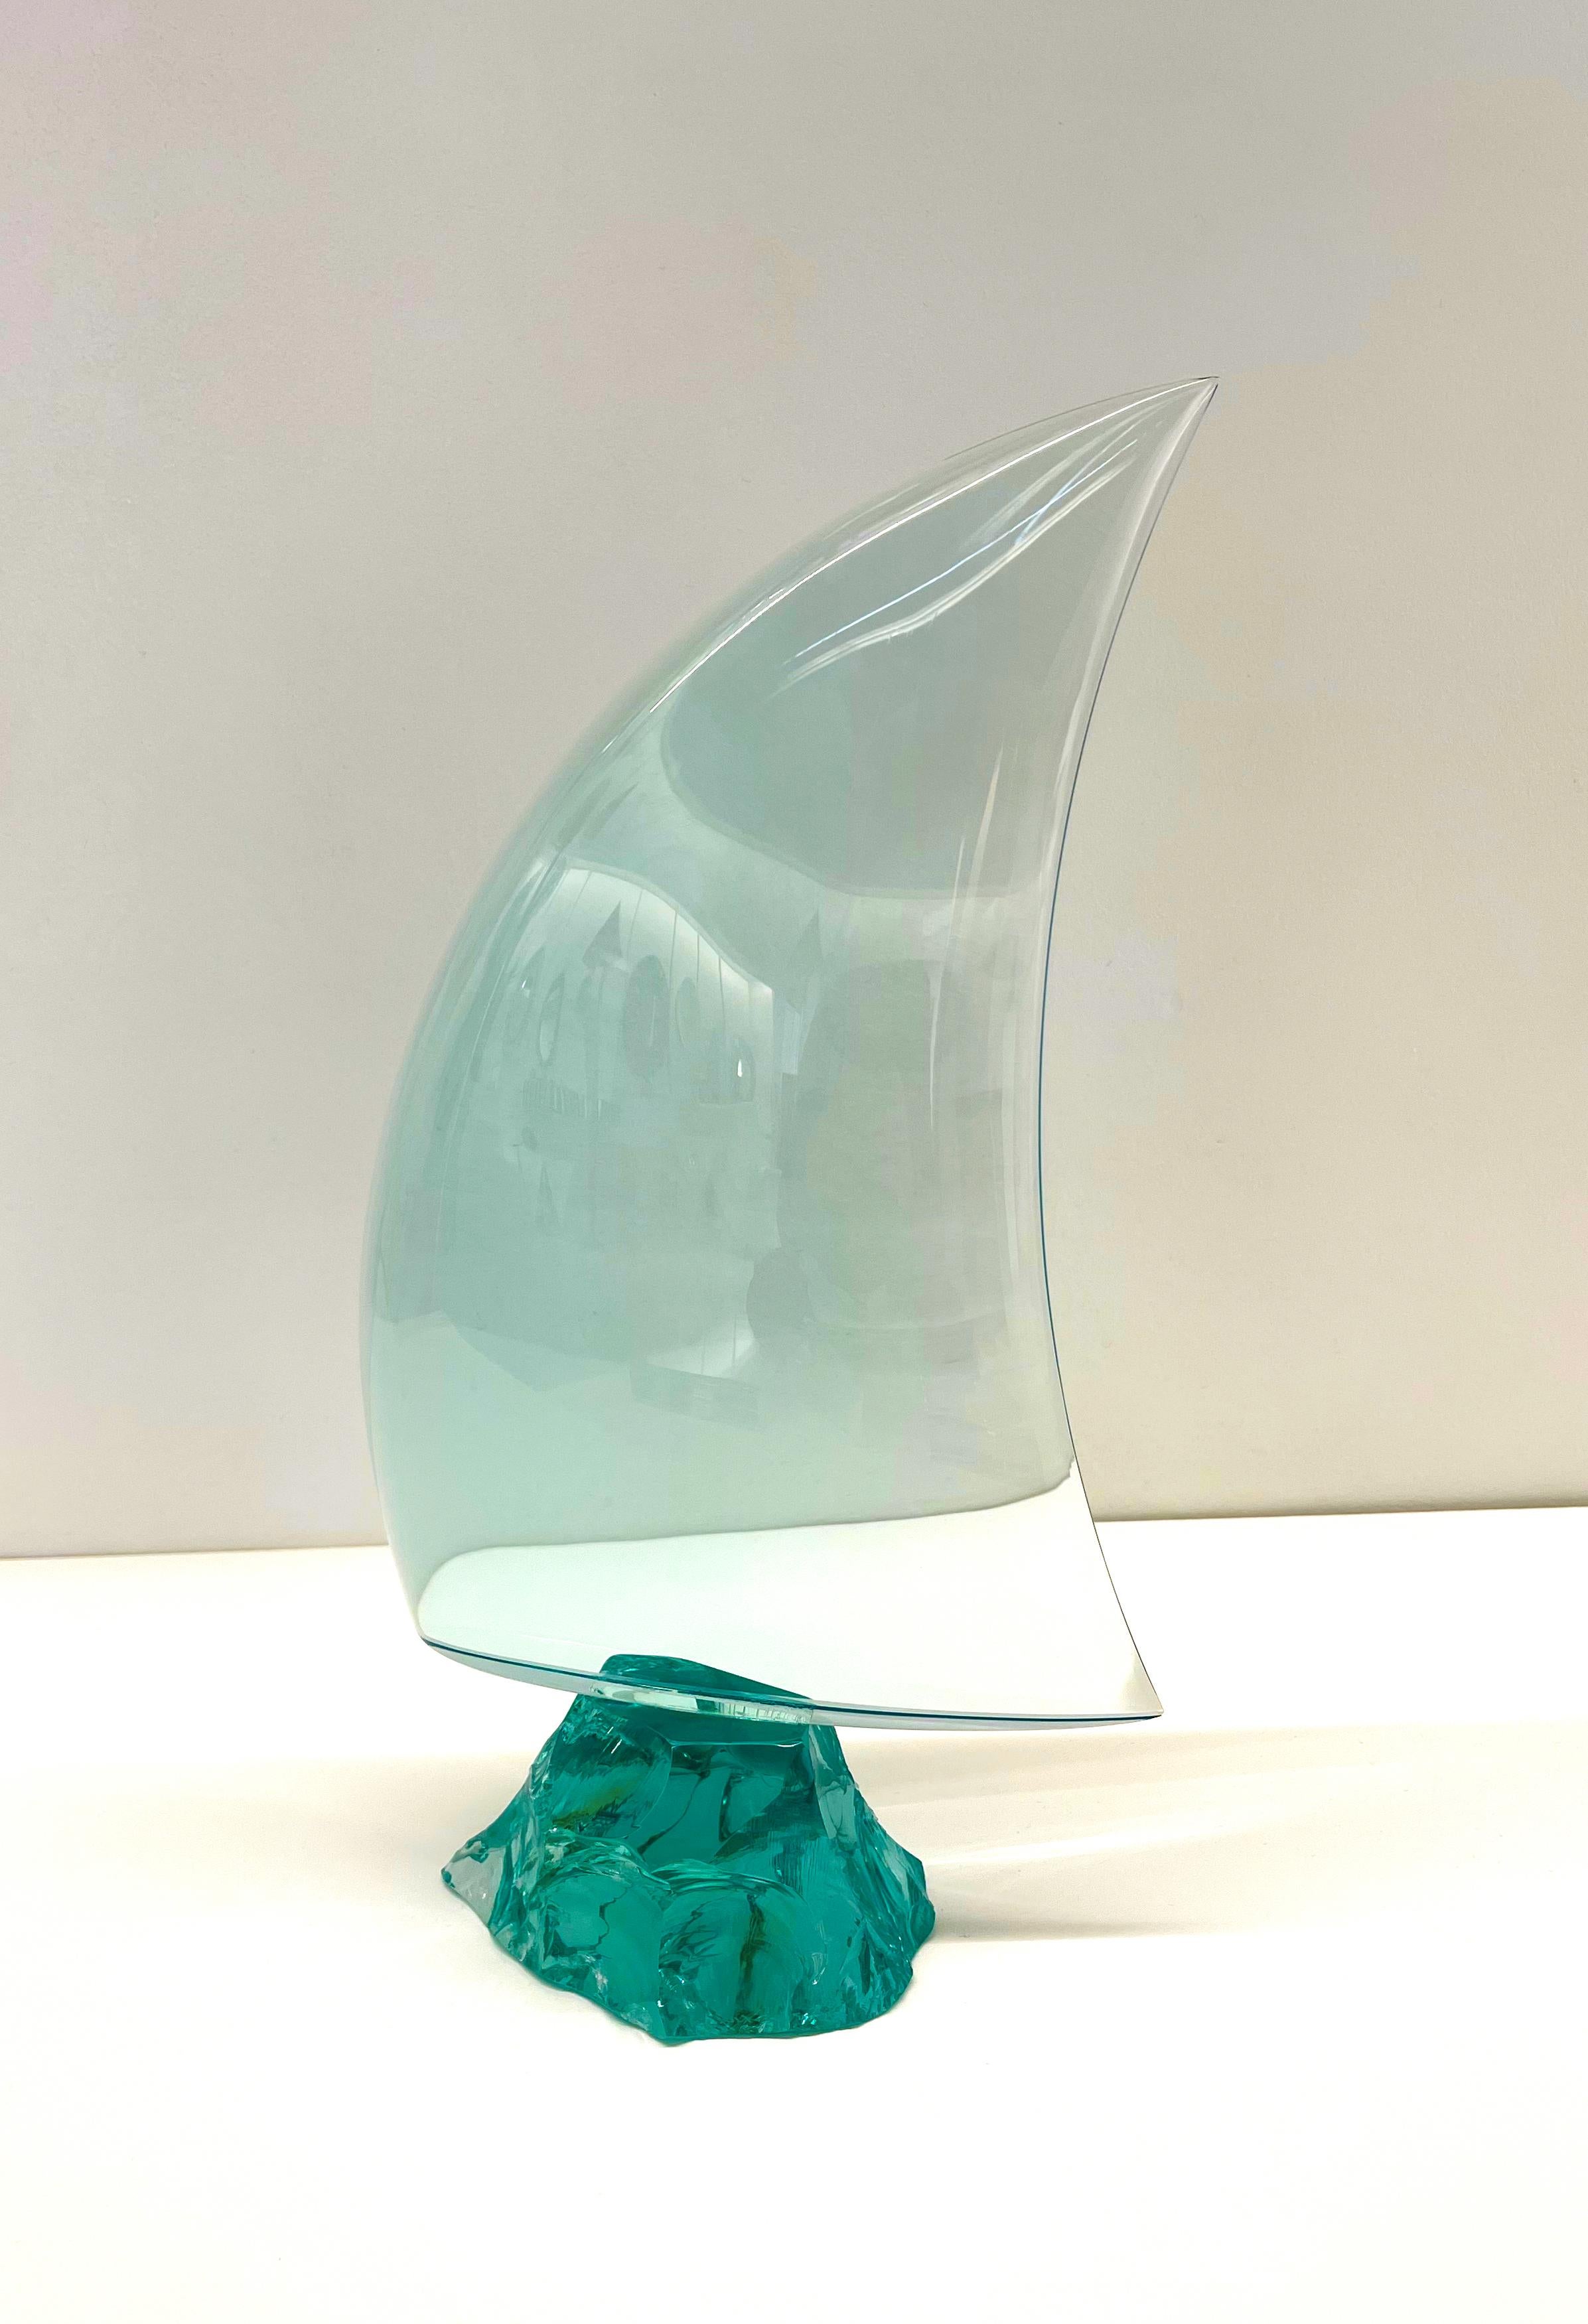 2021 Collection of decorative objects signed by Ghirò Studio (Milan).
The natural crystal has high transparencies with aquamarine reflections, it has been curved and handmade to represent a sail. Every sail is a real artistic sculpture. 
Each